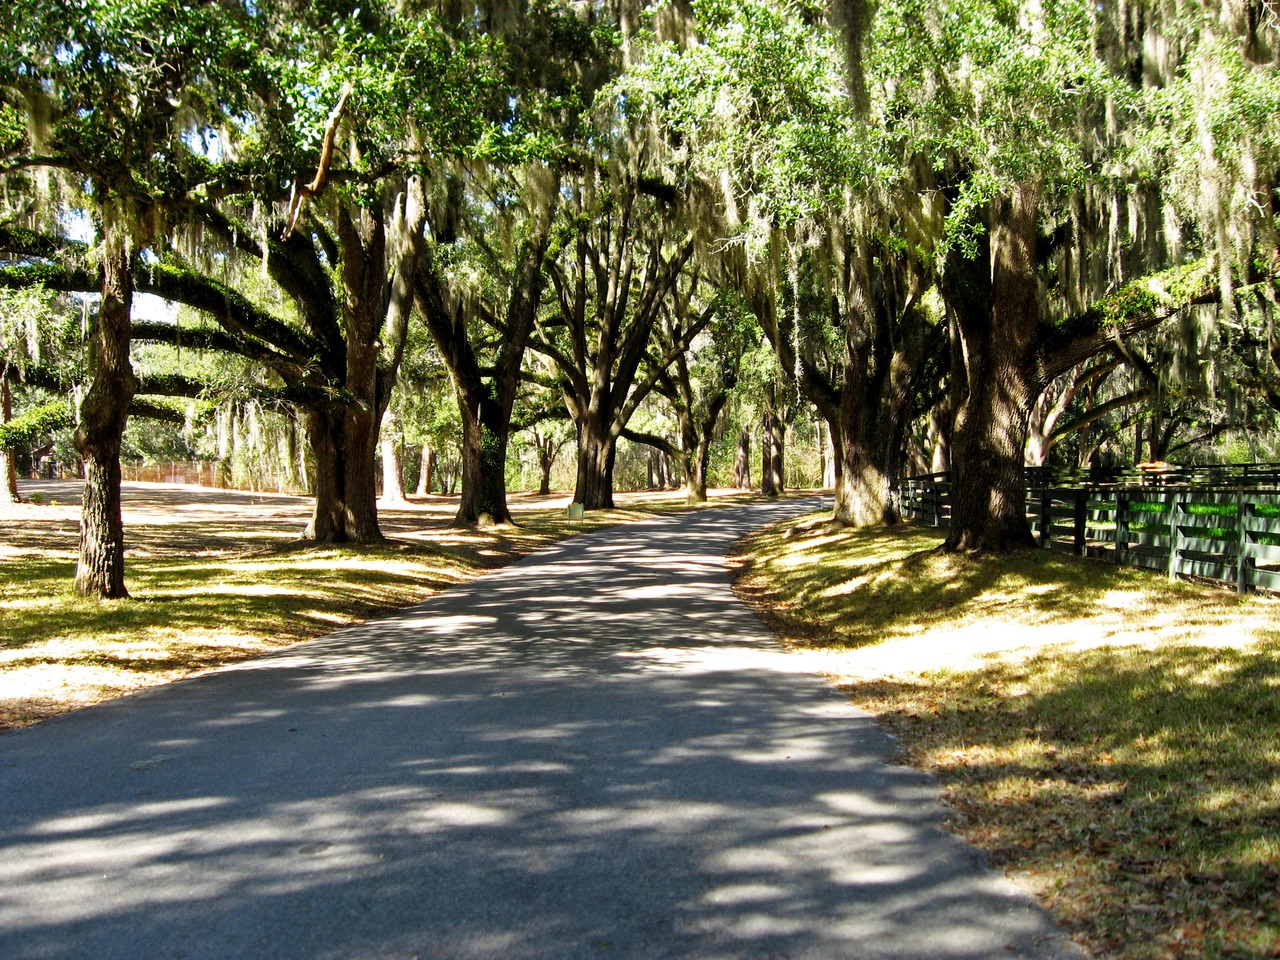 Canopy road west of the Stable Complex (1928) at Pebble Hill Plantation.